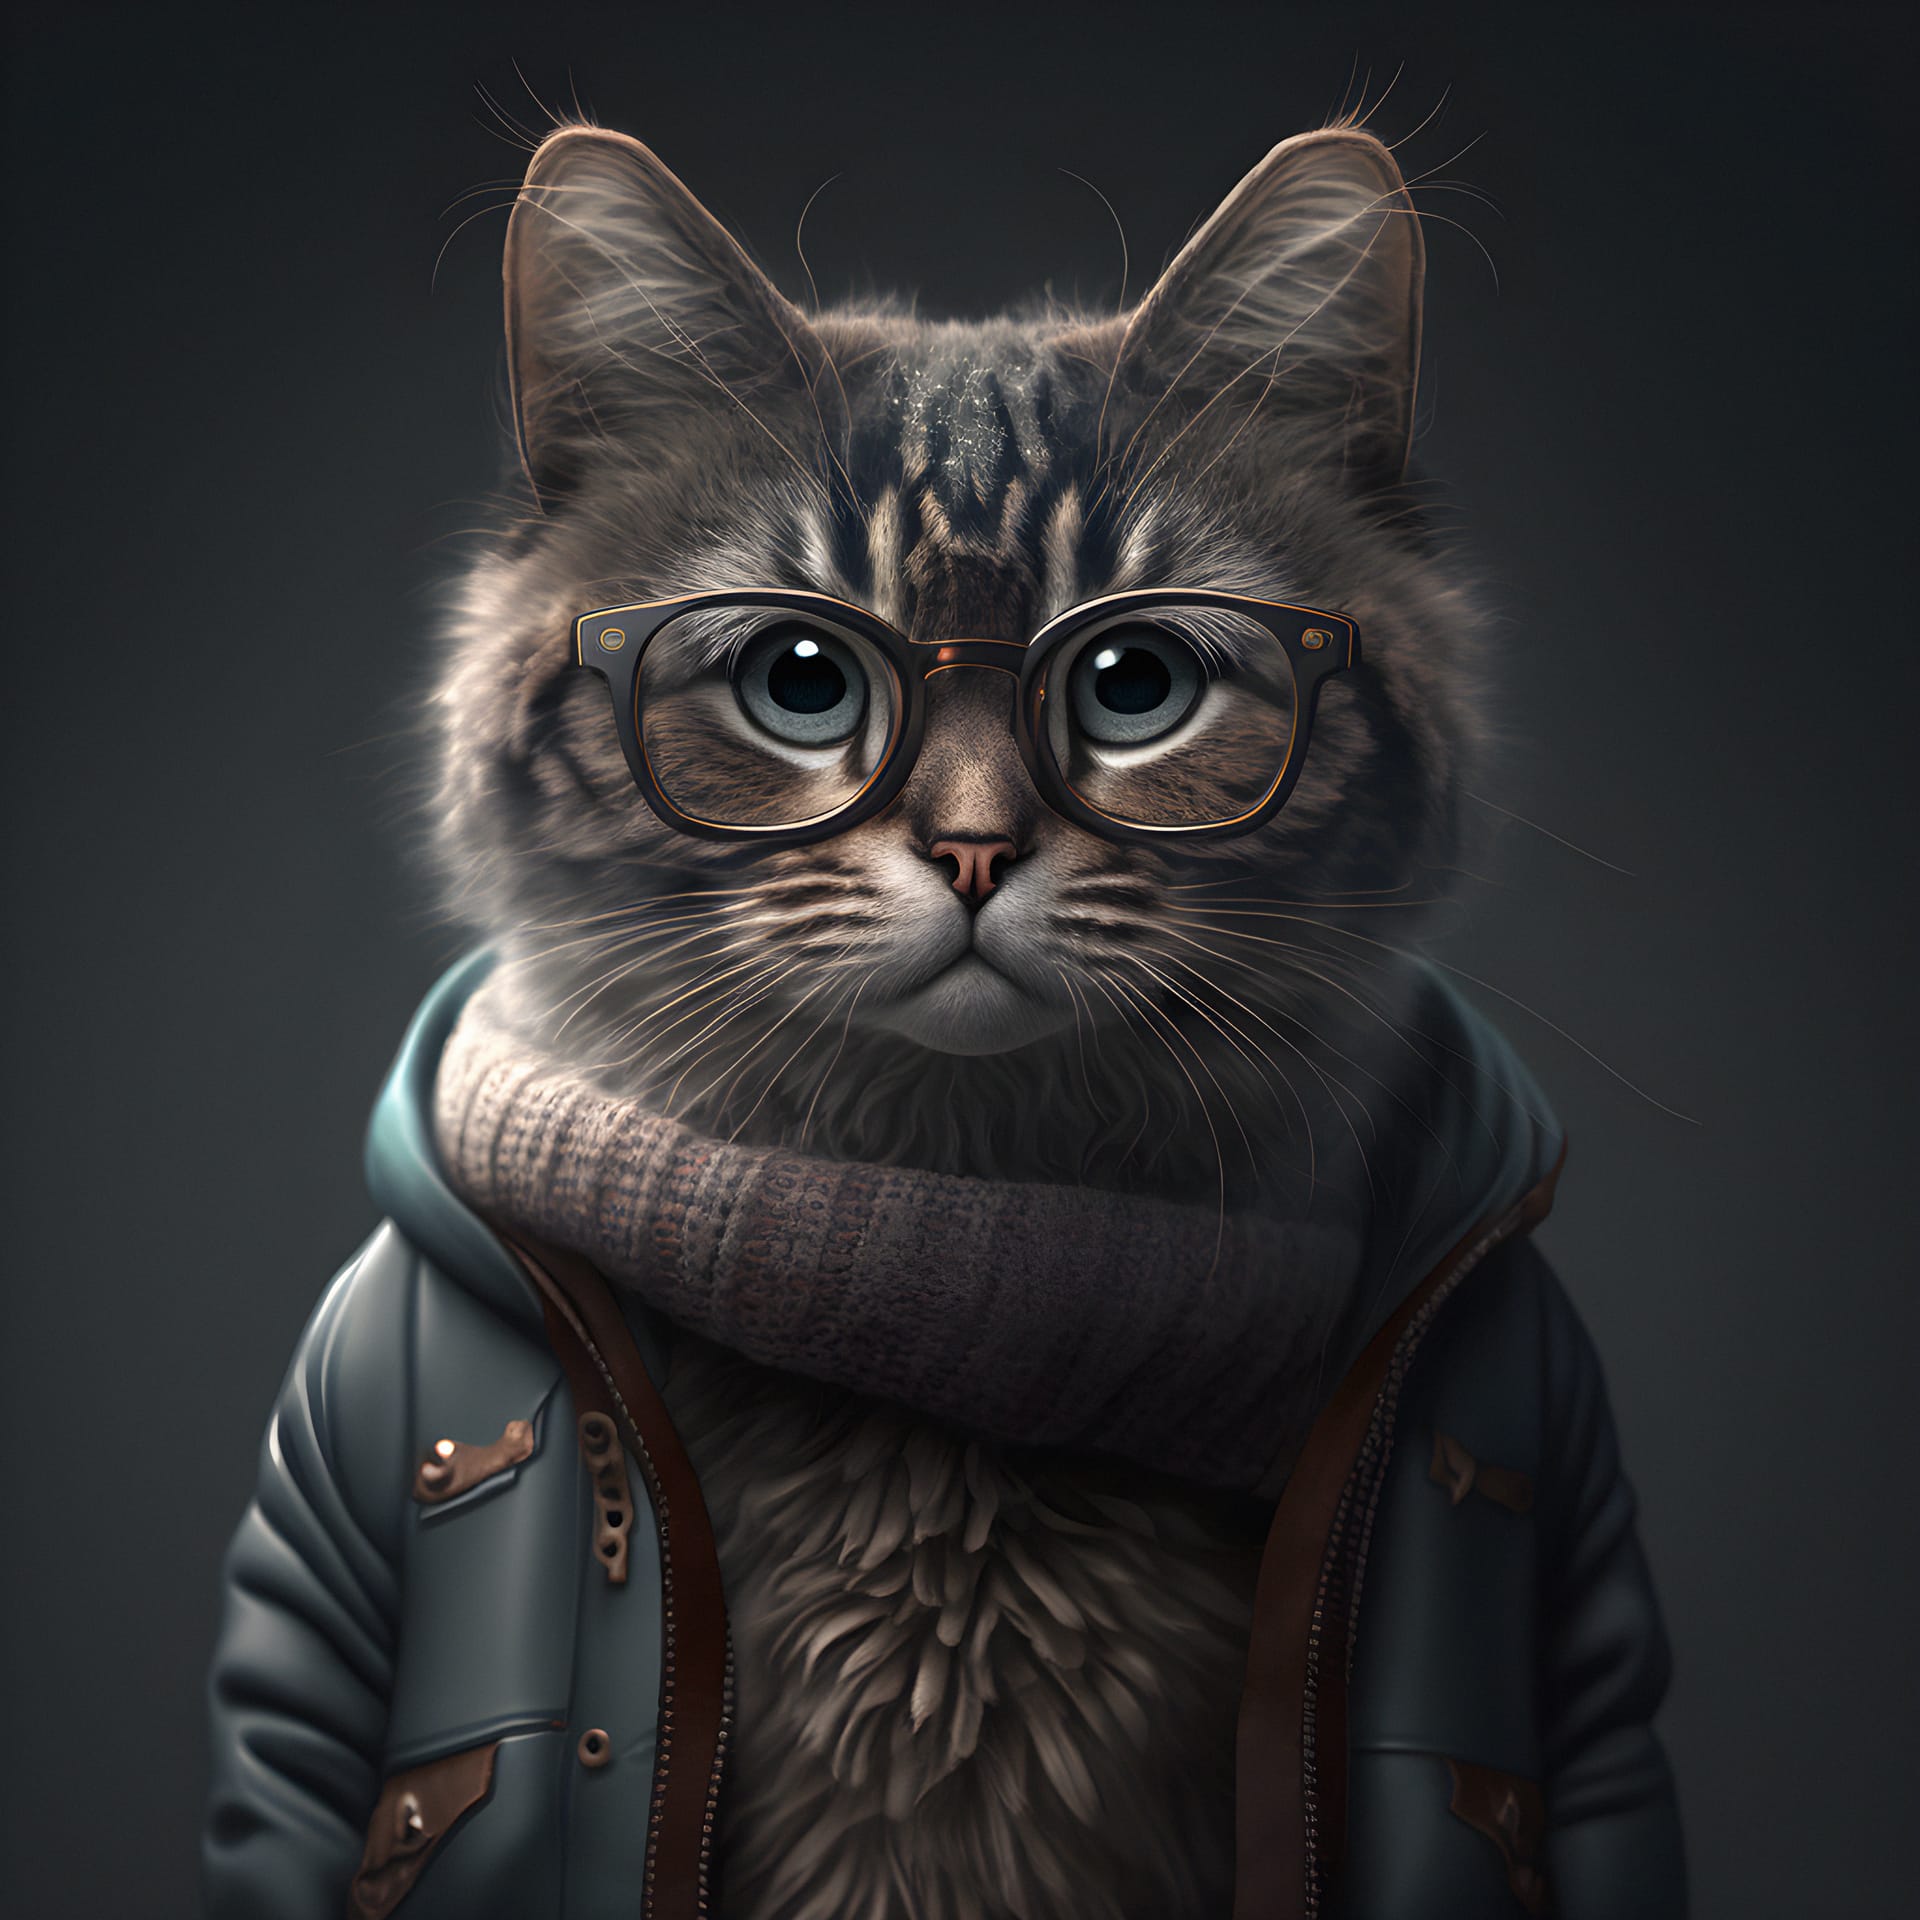 Hipster cat wearing clothes glasses cat portrait